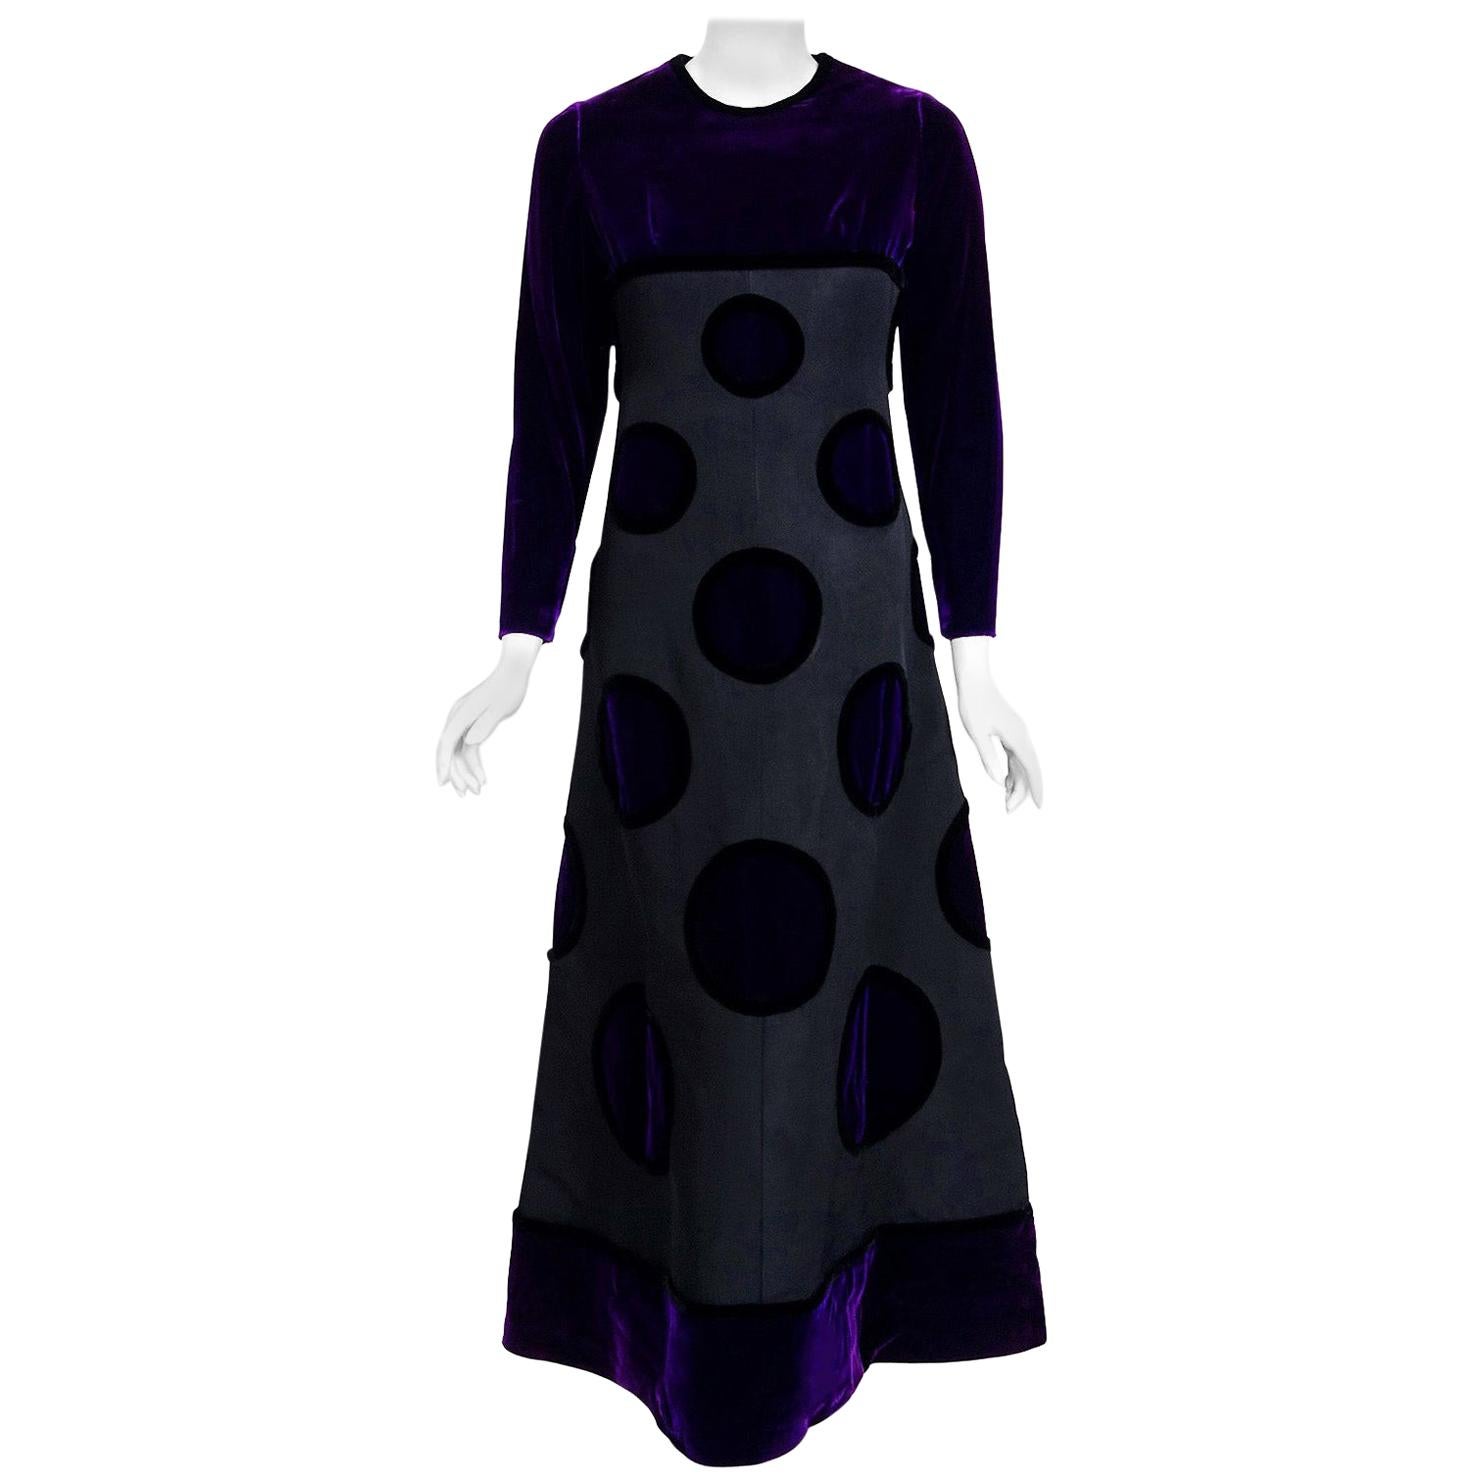 Breathtaking Pierre Balmain Haute Couture royal purple velvet and black silk 'Copenhague' ensemble dating back to his opulent 1970 fall-winter collection. This iconic designer created a very sculptural quality which was always allied with a ladylike